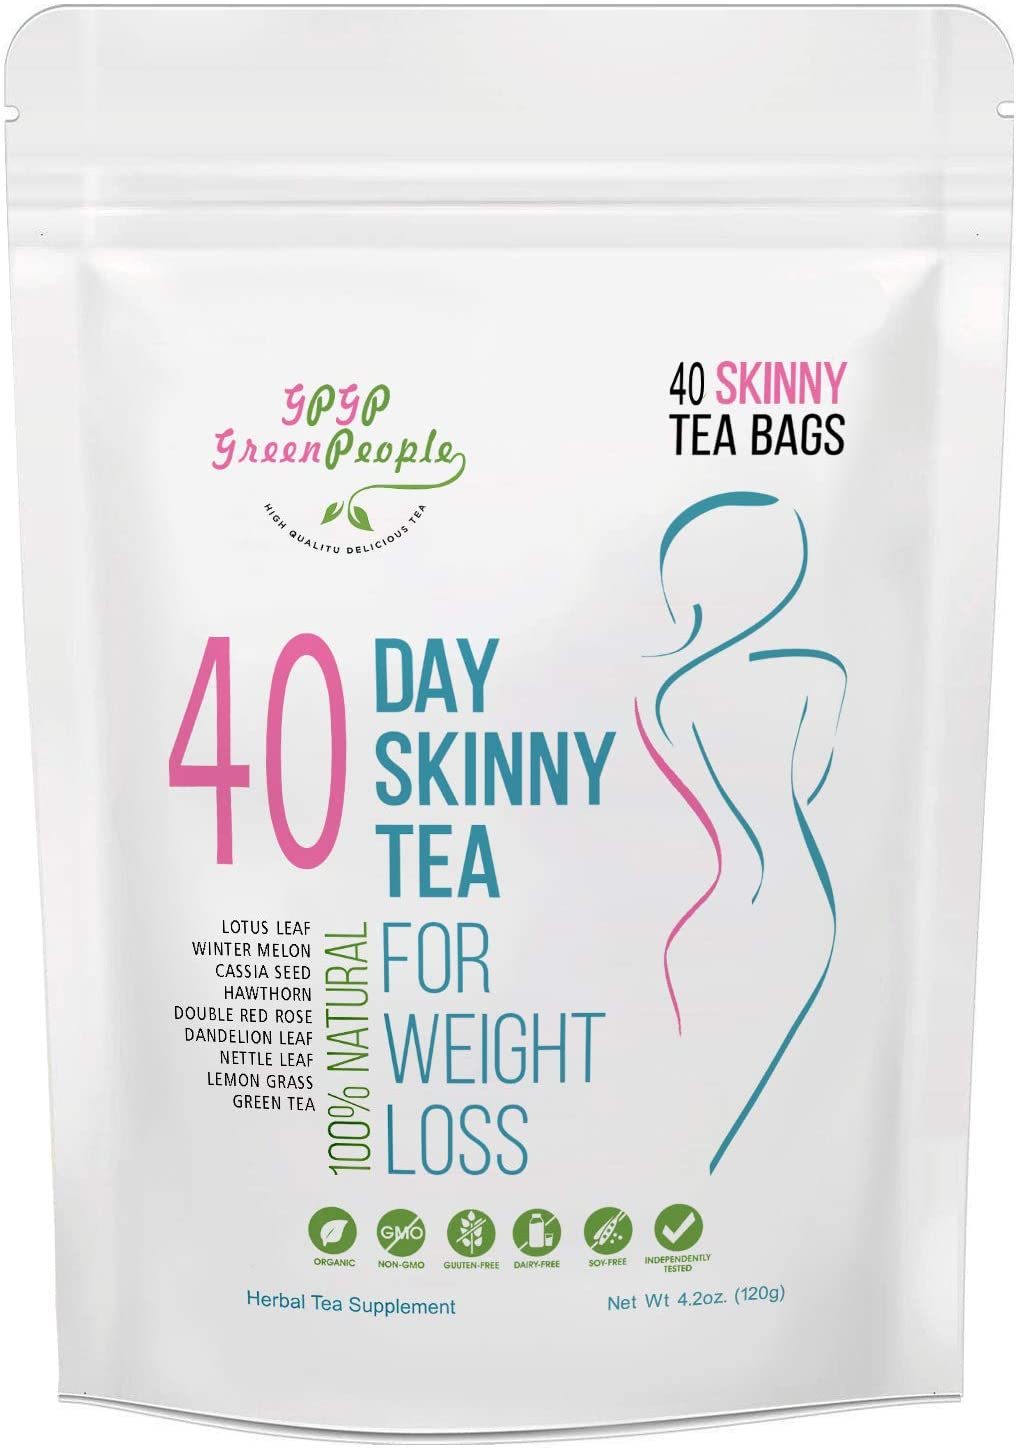 Detox Tea Diet Tea for Body Cleanse - 40 Day Weight Loss Tea for Women, Natural Ingredients, GPGP GreenPeople Skinny fit Tea for Slim, Belly Fat (40days)